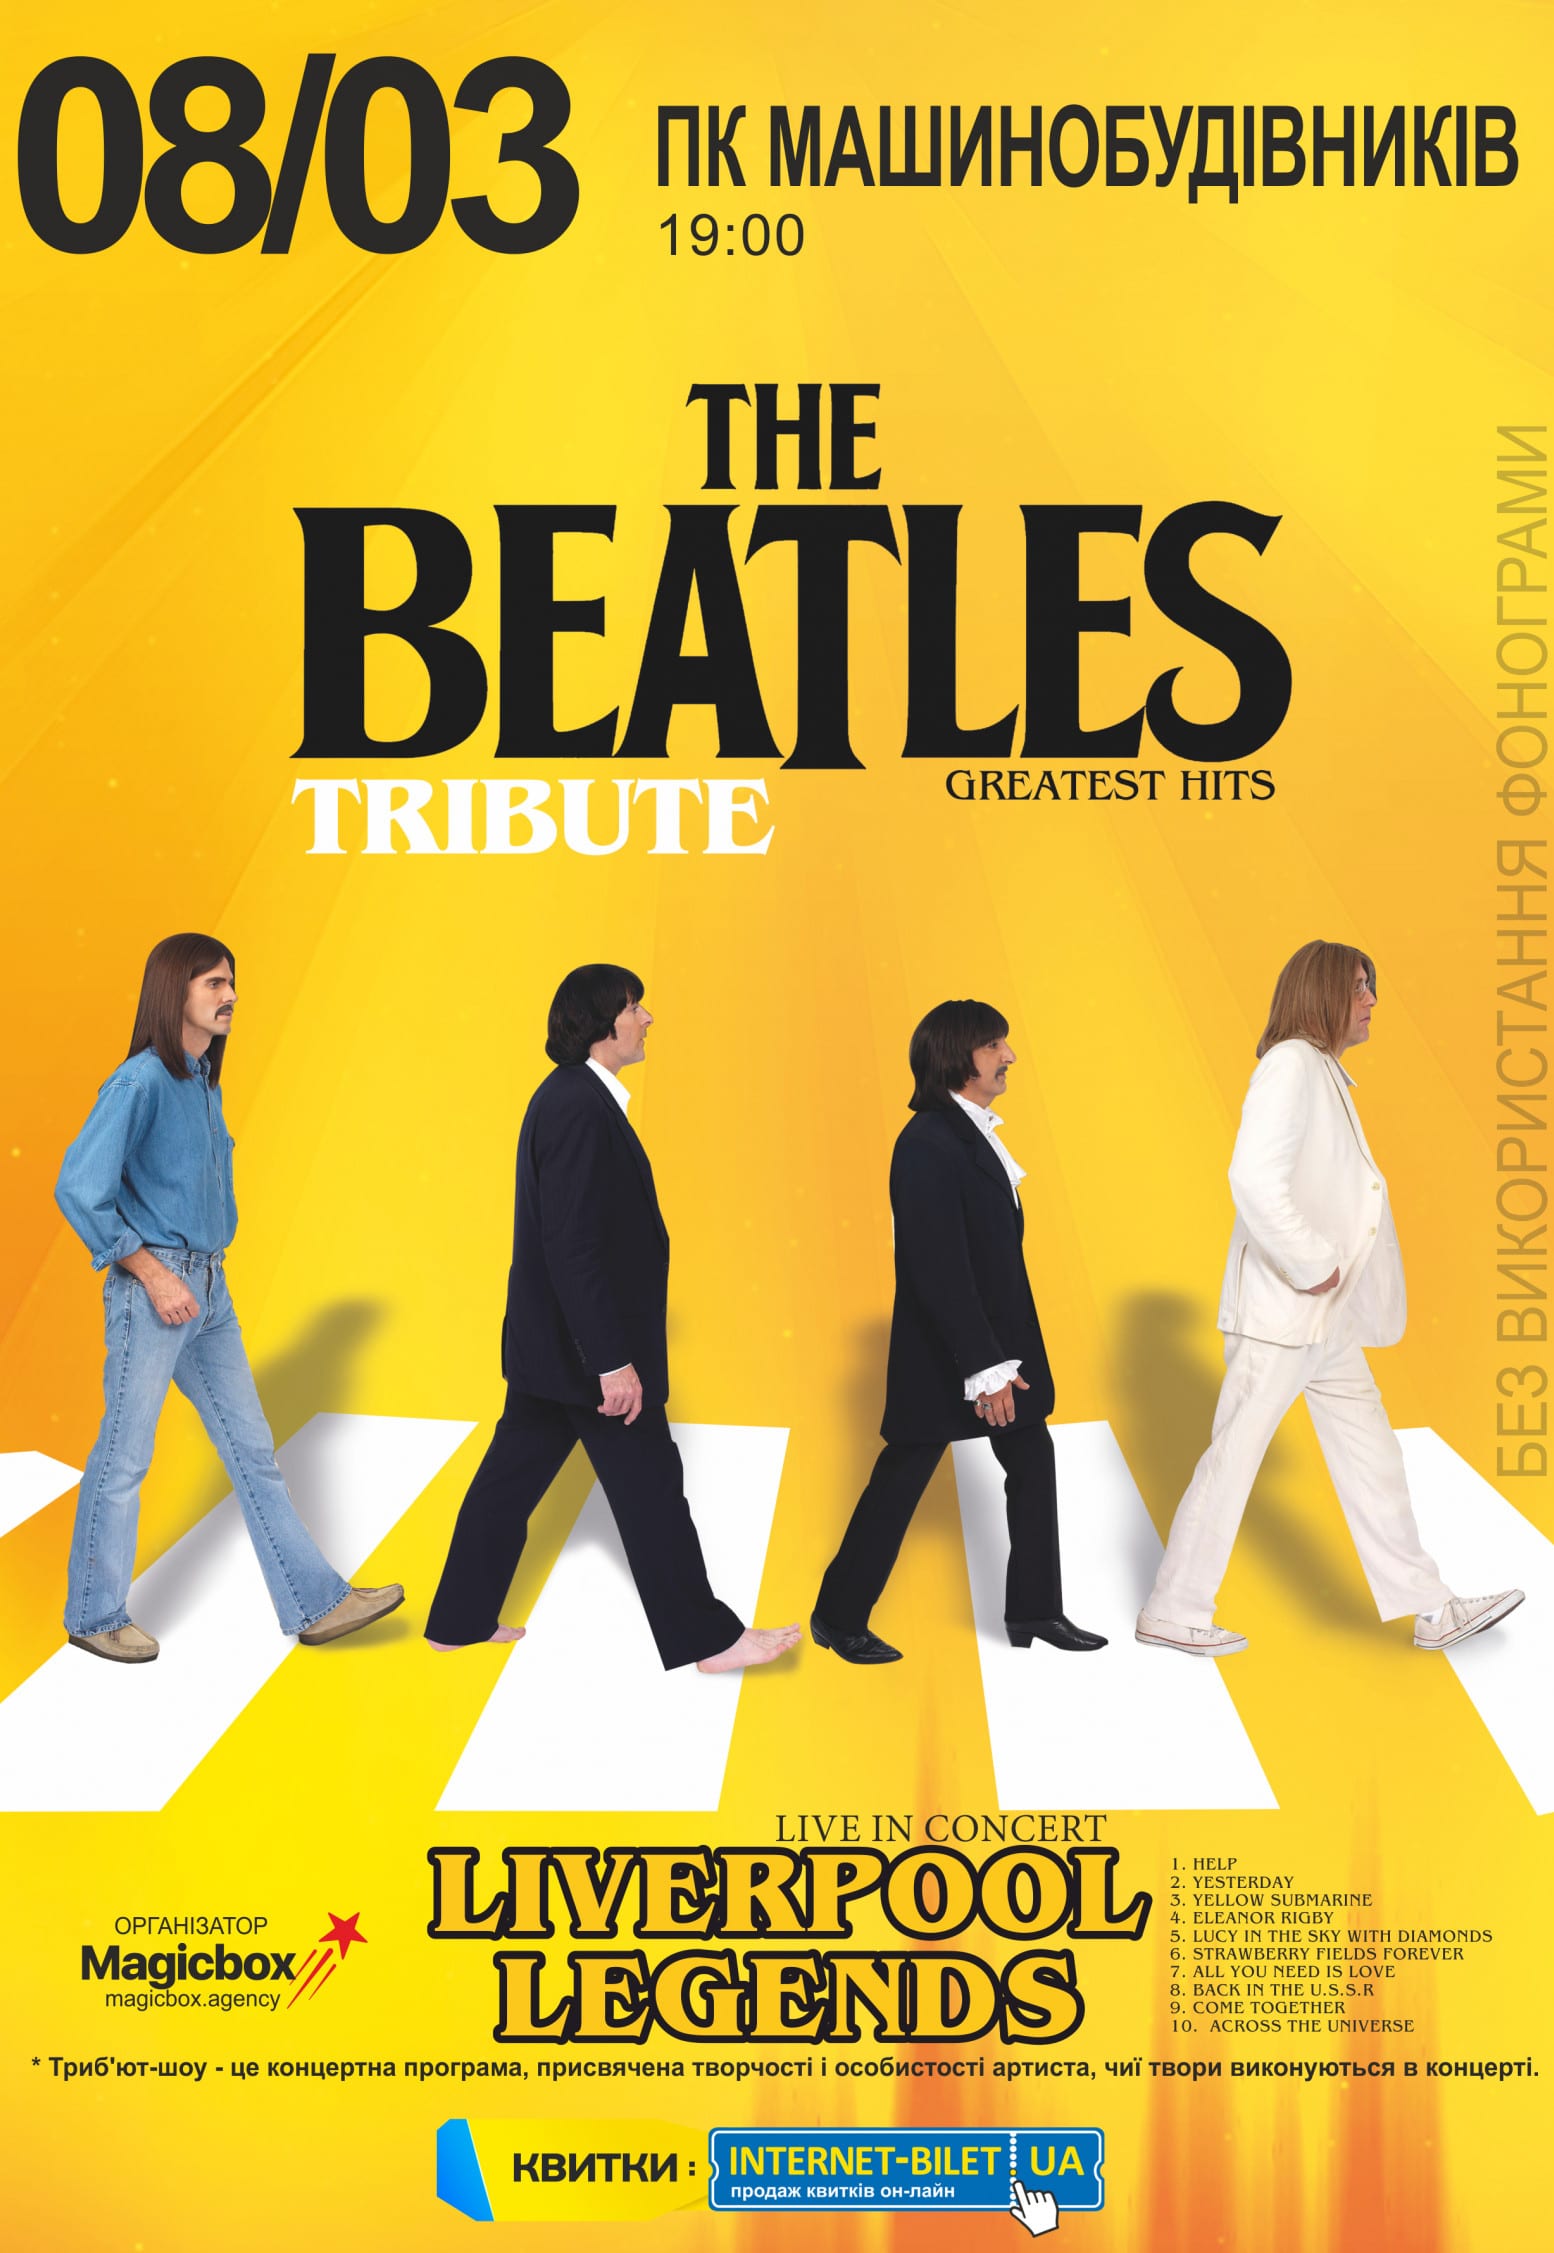 The Beatles Tribute - Liverpool Legends Днепр, 08.03.2020. Афиша Днепра